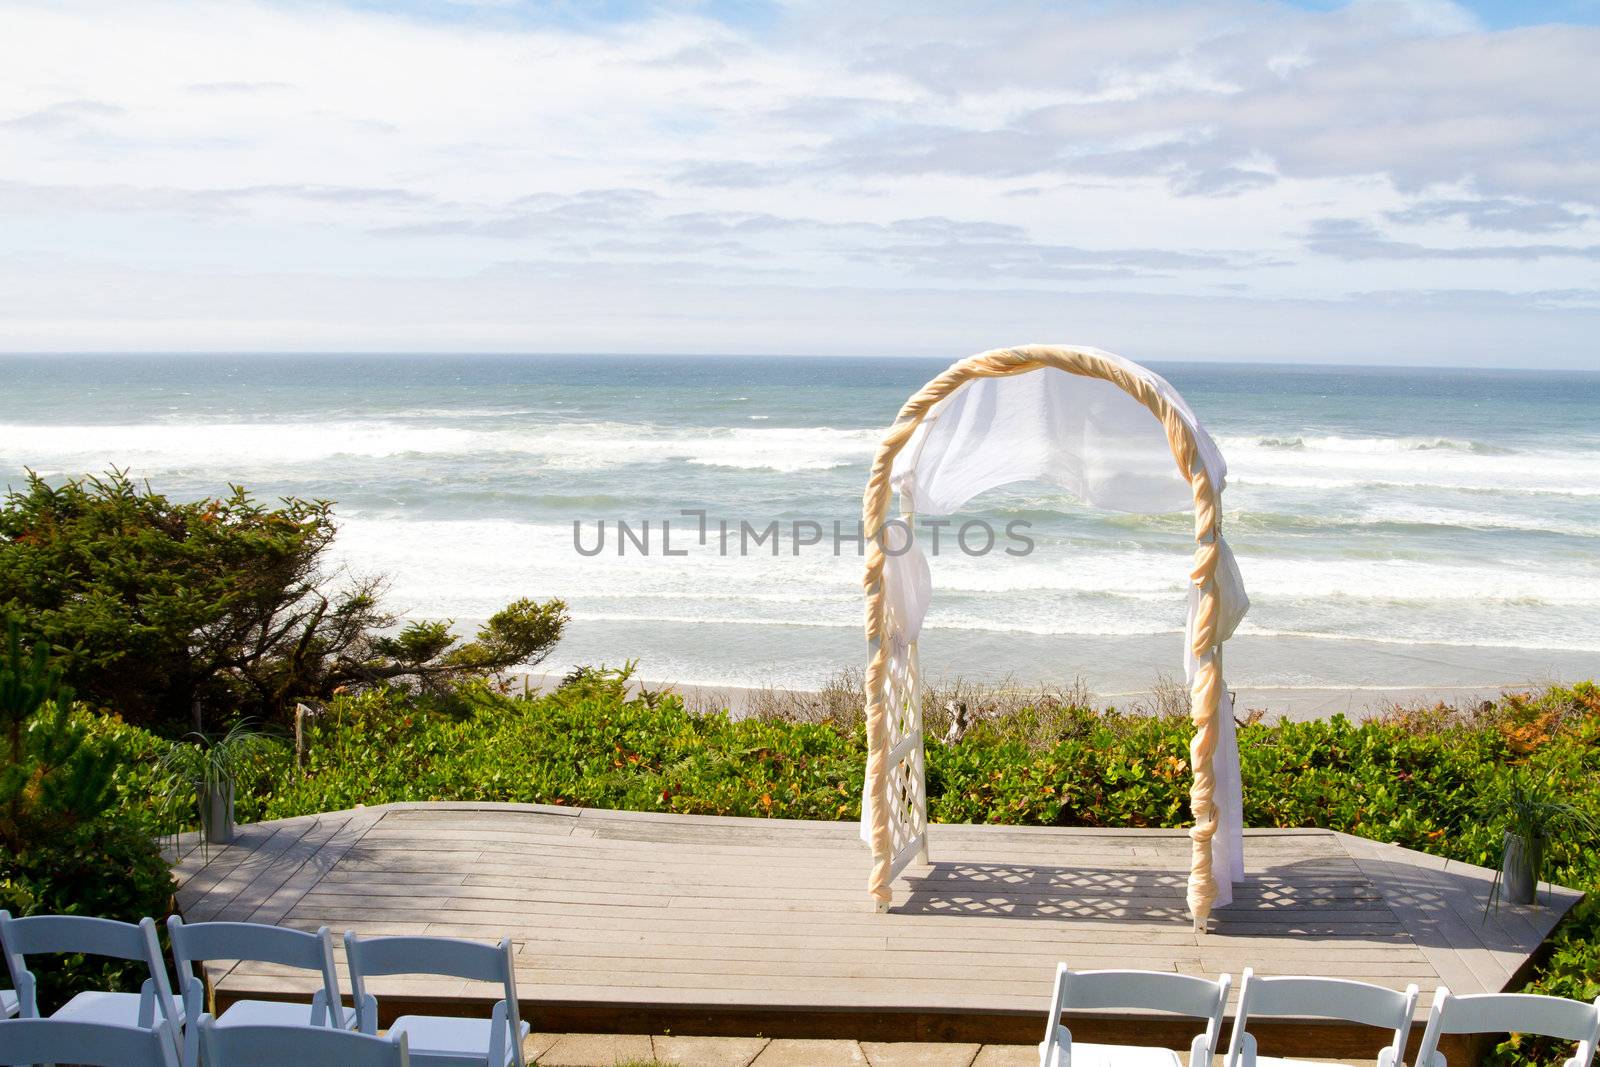 A beautiful setting for a wedding along a beach overlooking the Pacific Ocean in Oregon.